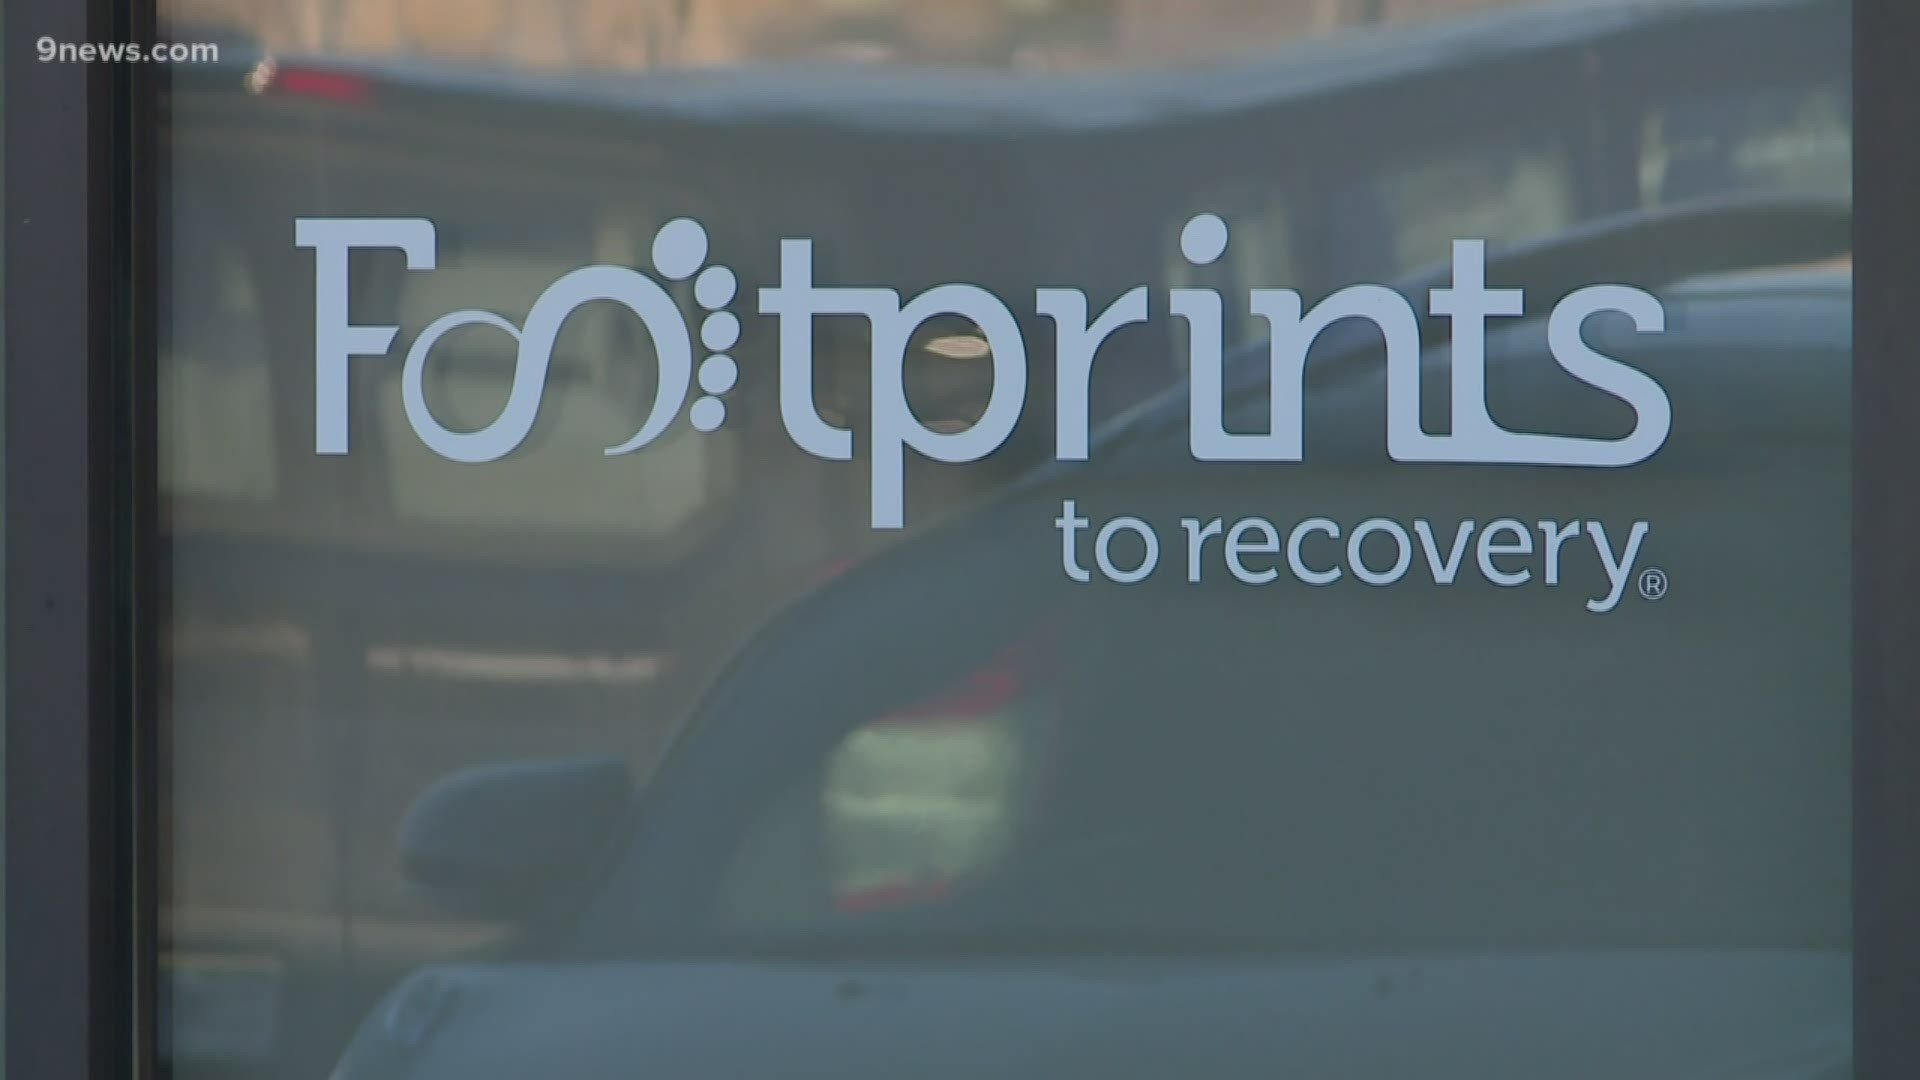 We talked to an addiction and recovery center about how they help those in recovery during the COVID-19 outbreak.